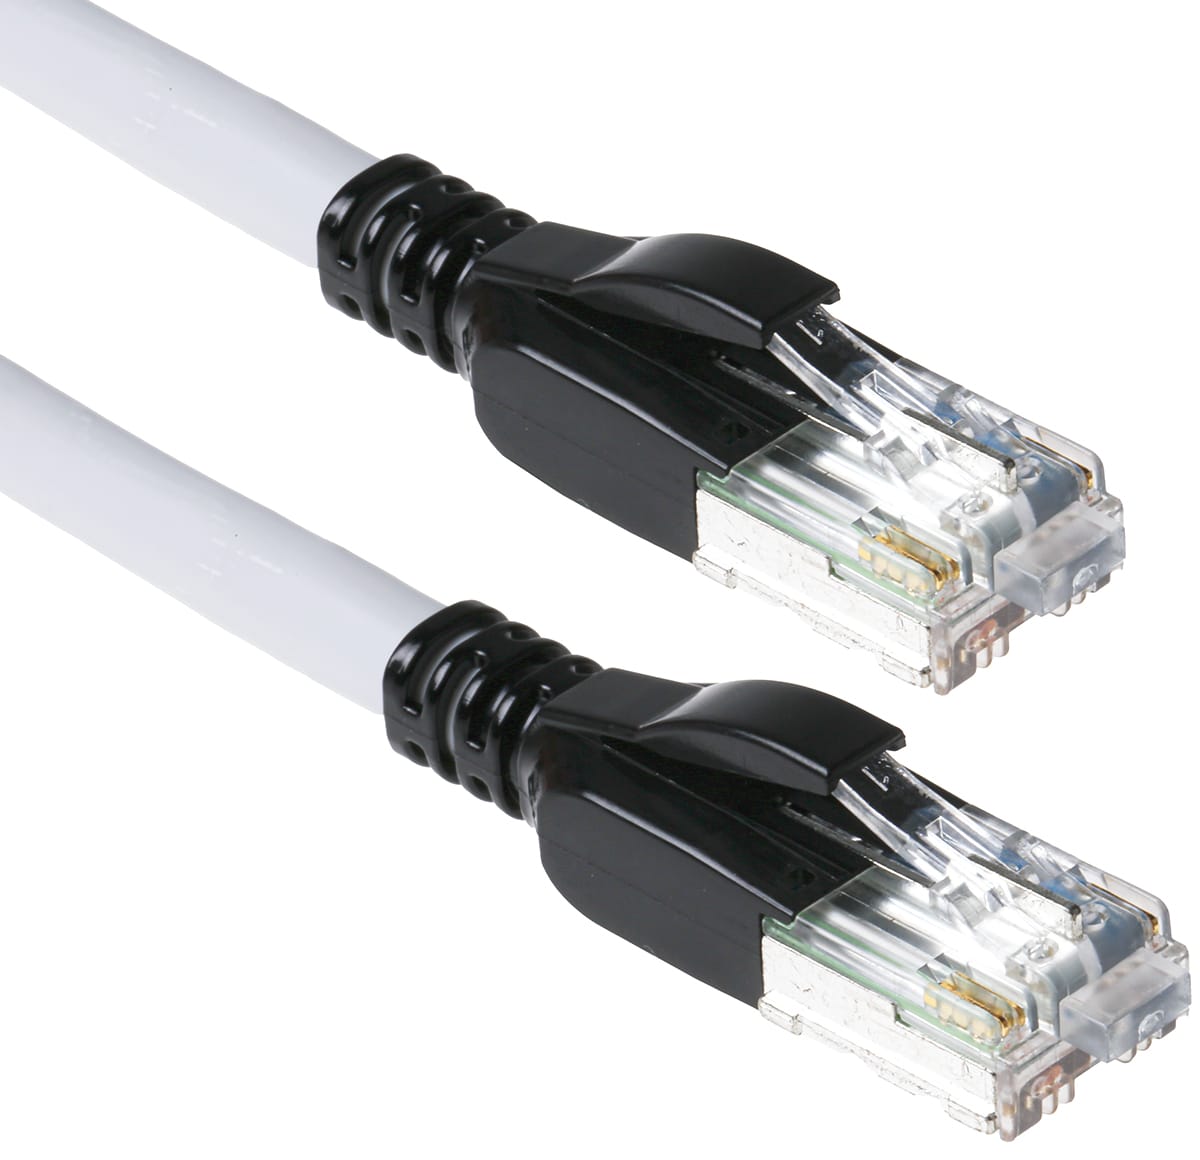 How To Terminate CAT 7 Ethernet Cables - Easy Guide